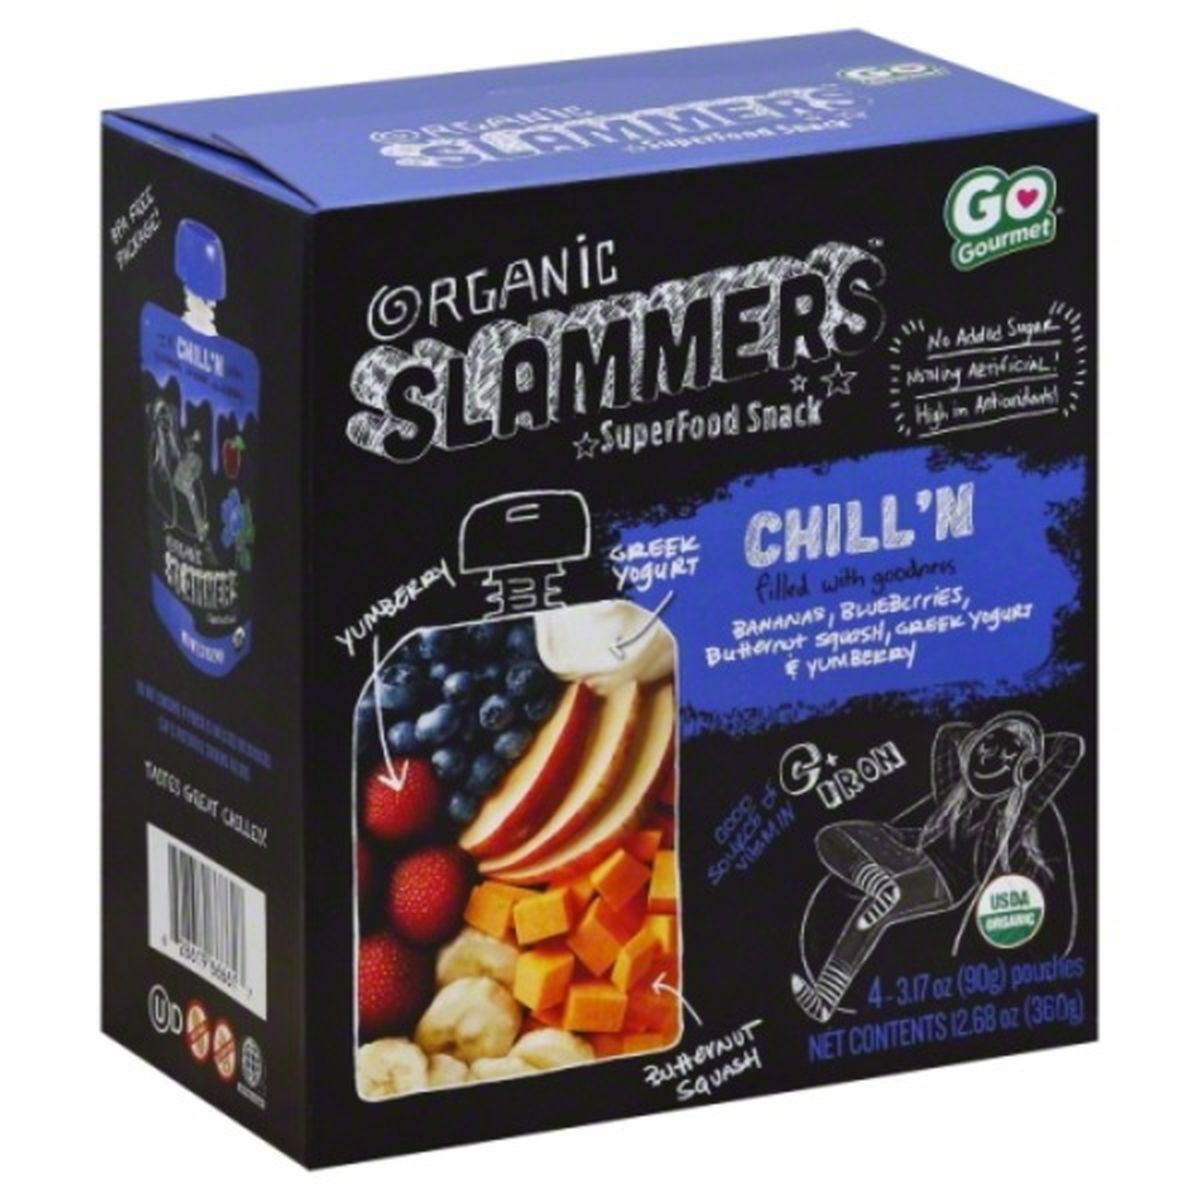 Calories in Slammers Slammers SuperFood Snack, Organic, Chill'n